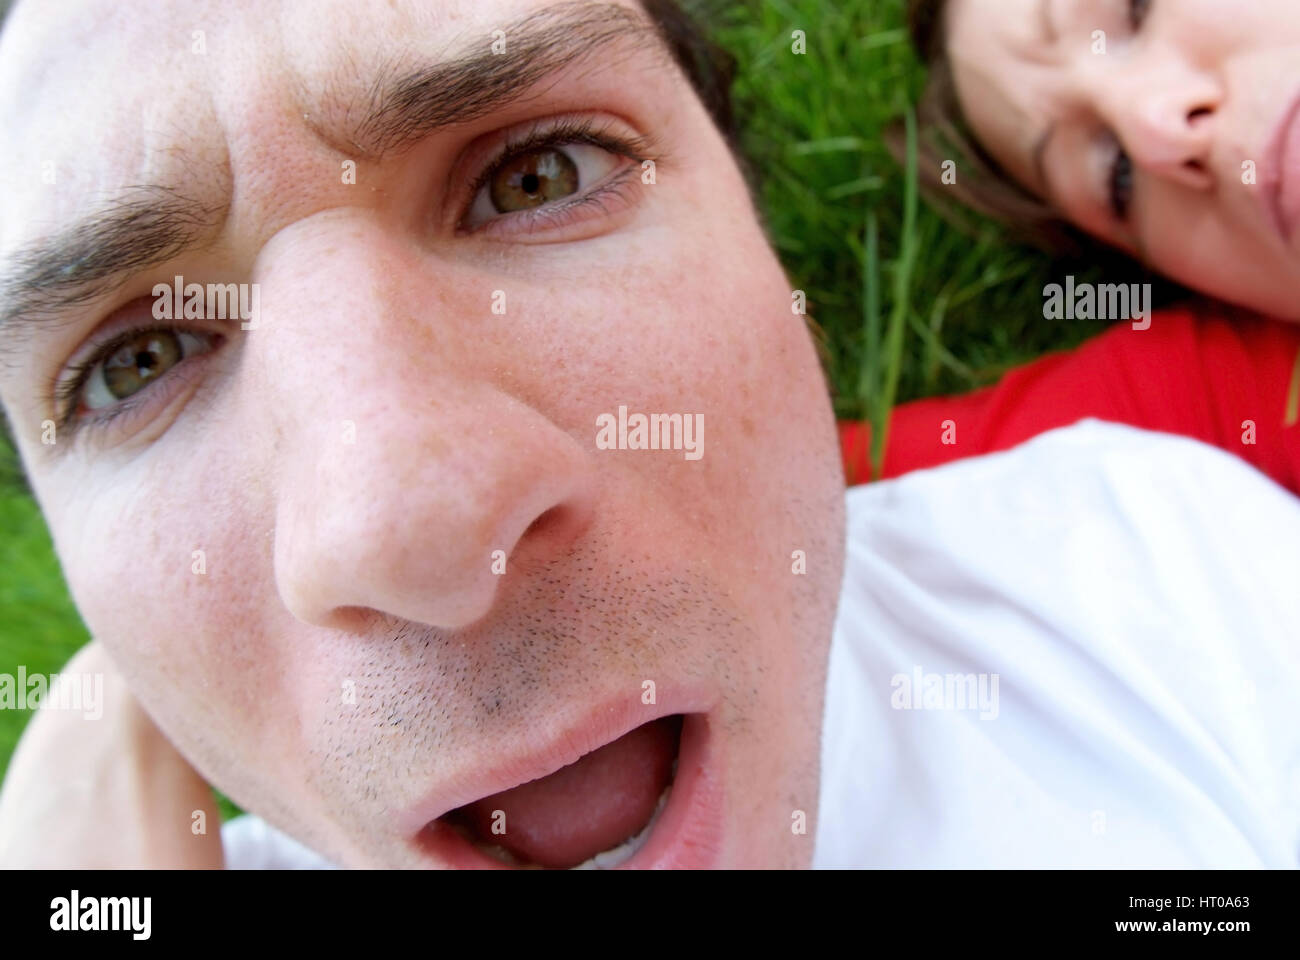 empoerter, junger Mann mit Freundin in Wiese liegend - disgusted young man with woman Stock Photo